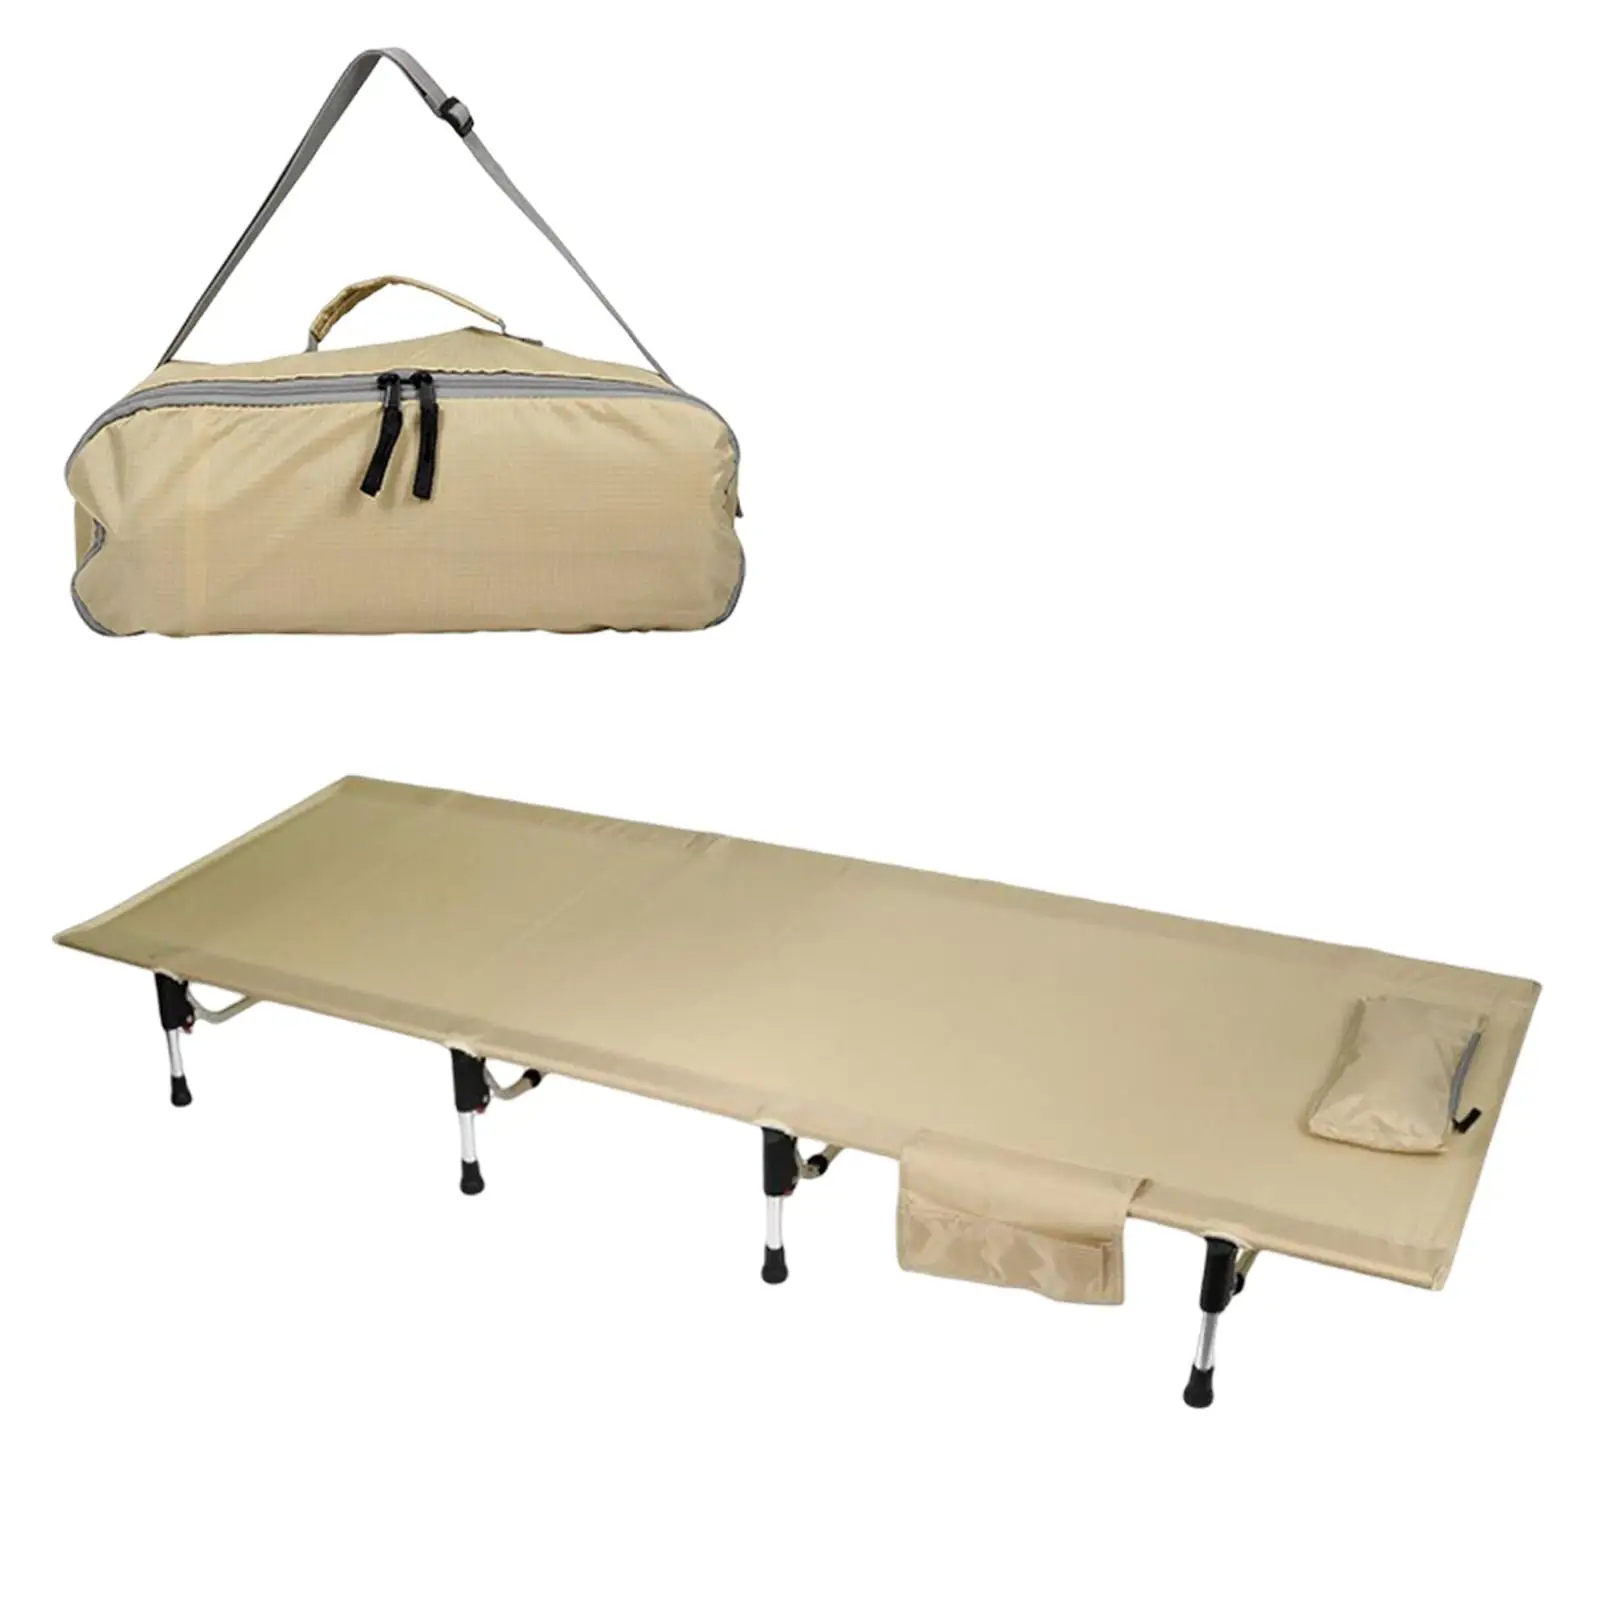 Strong Folding Camping Cot 25.6`` Wide Single Person Foldable 73